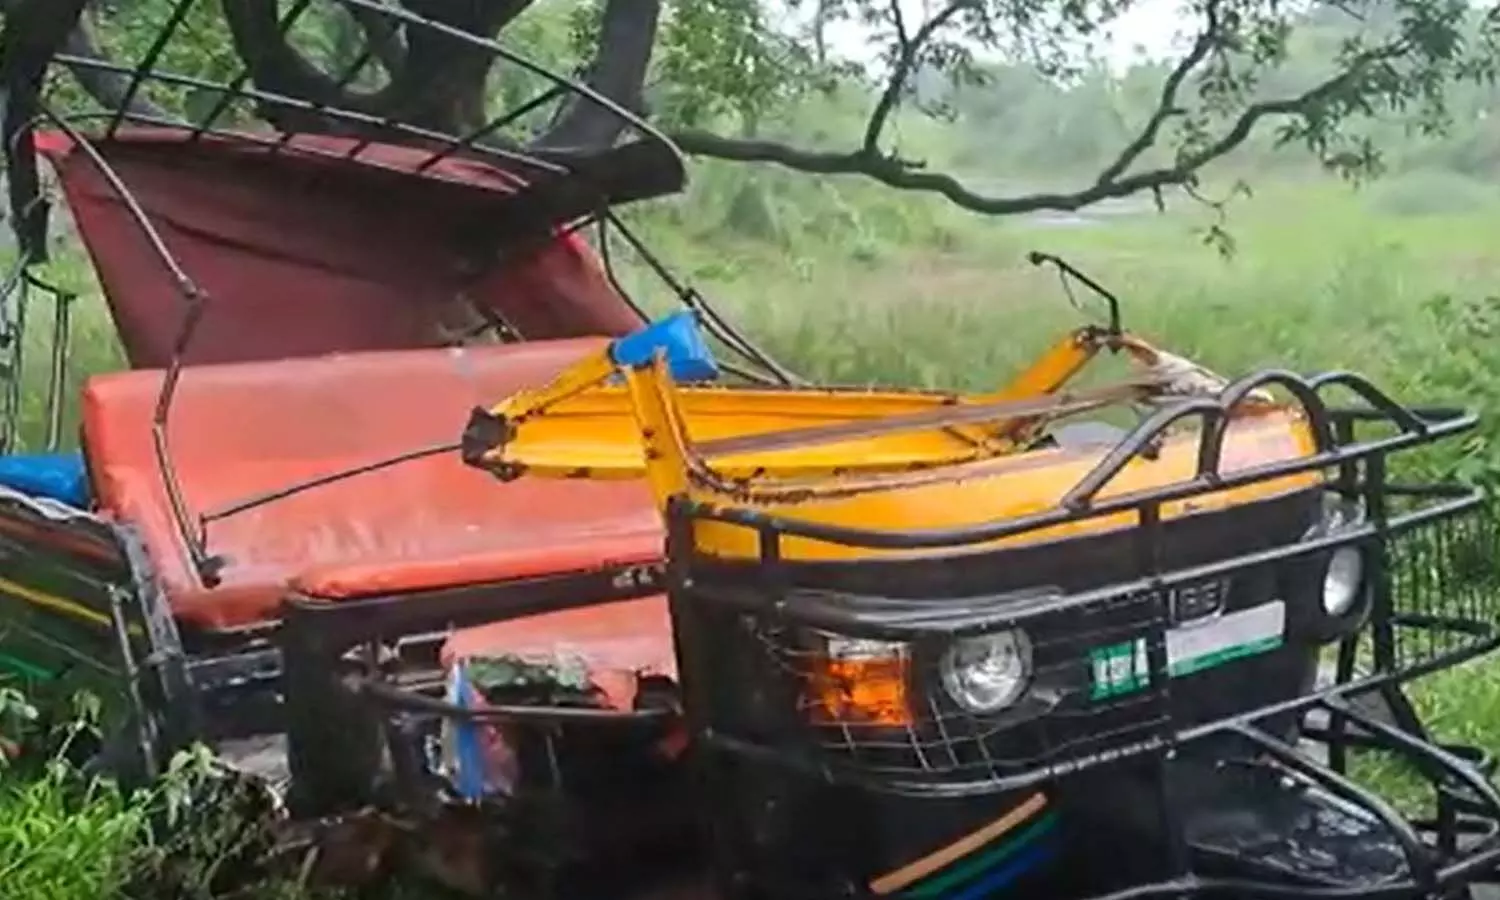 About a dozen people injured in a road accident in Ballia, mostly children